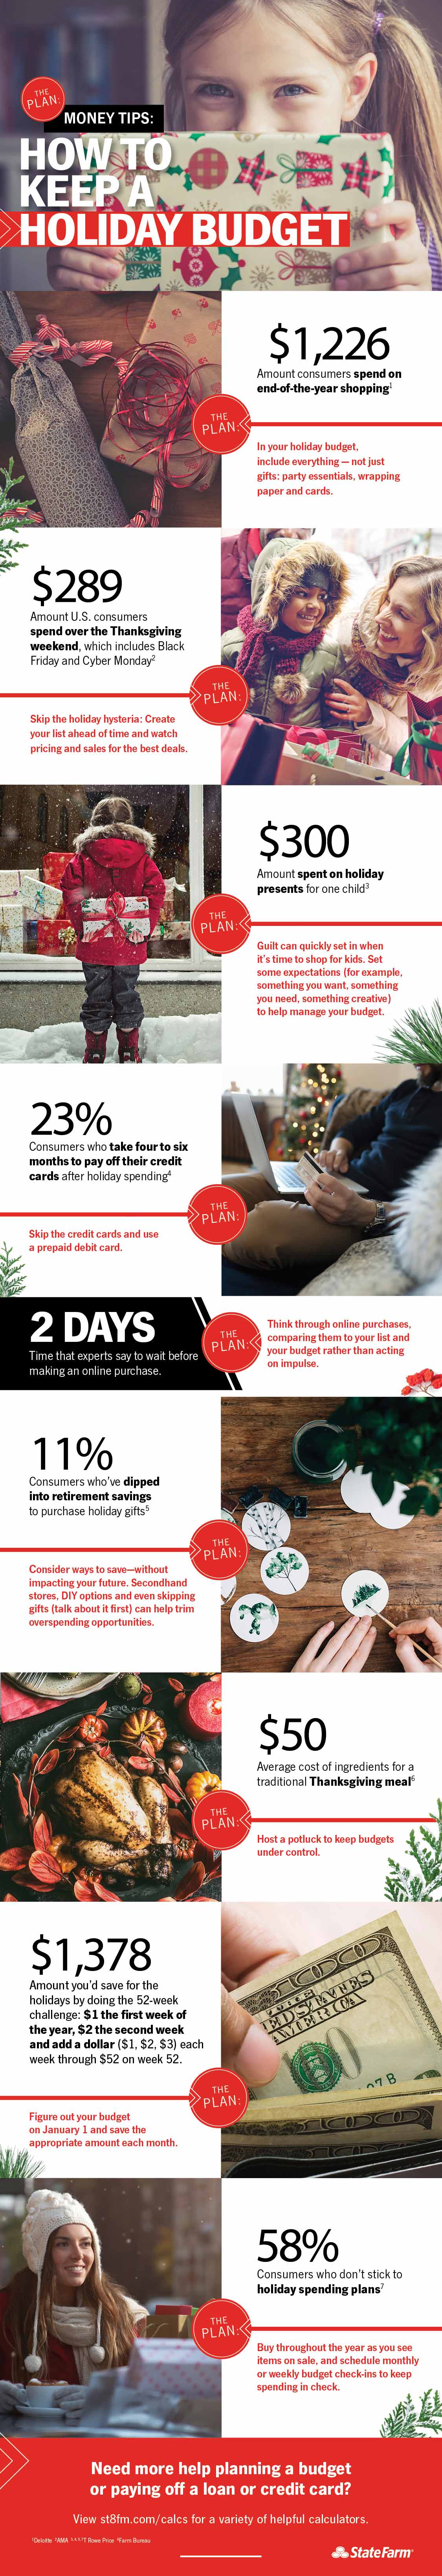 Infographic sharing how to keep a holiday budget with tips and resources.